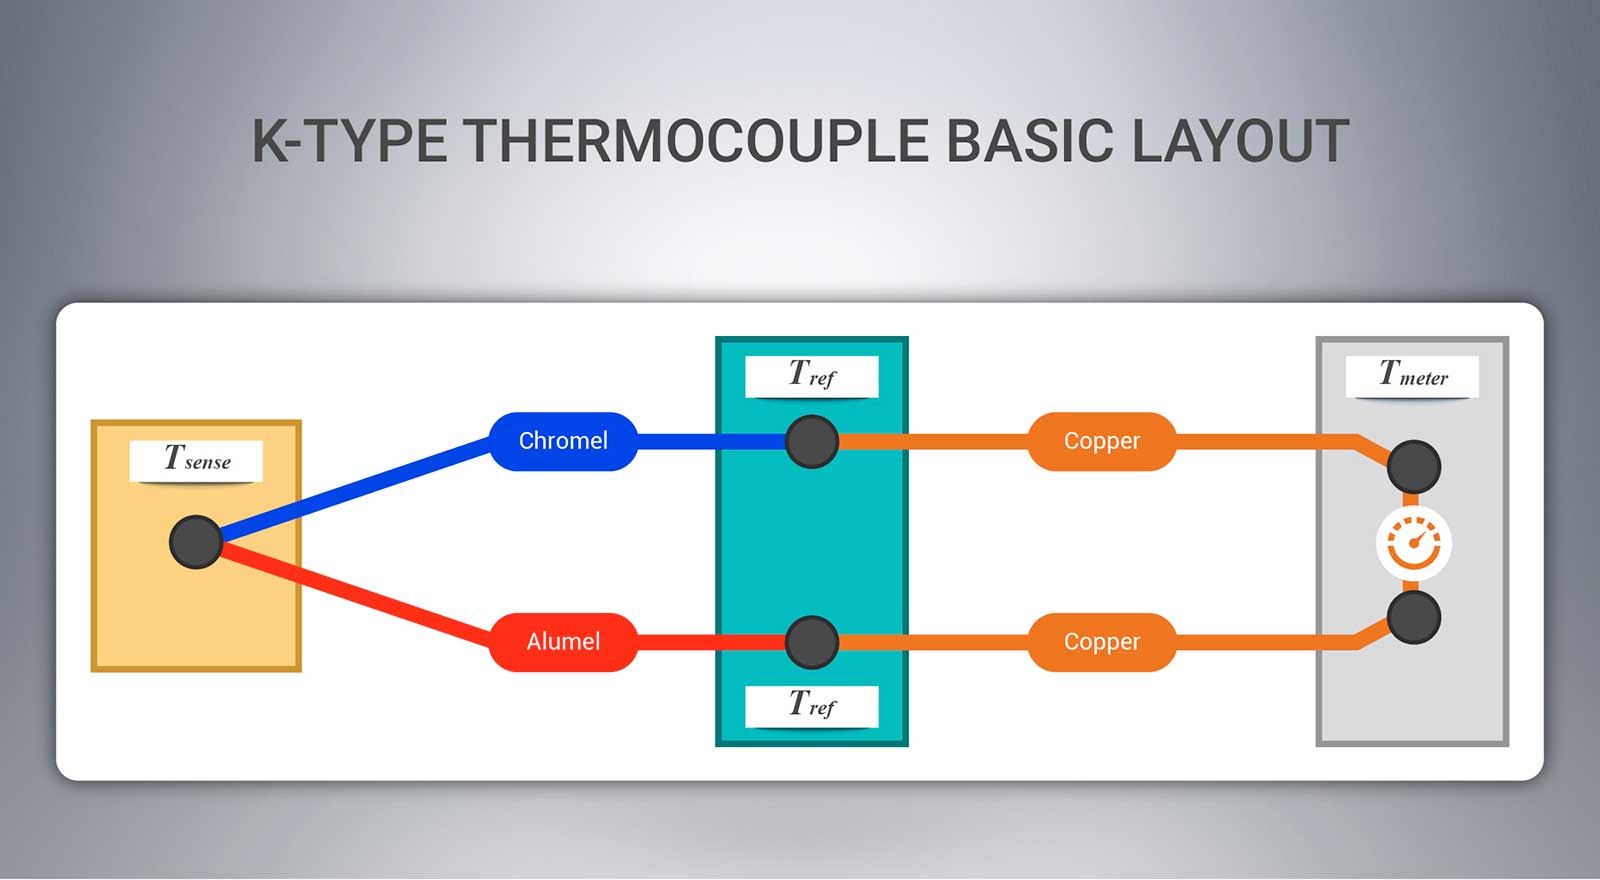 Figure A: K-type thermocouple basic layout (Source)